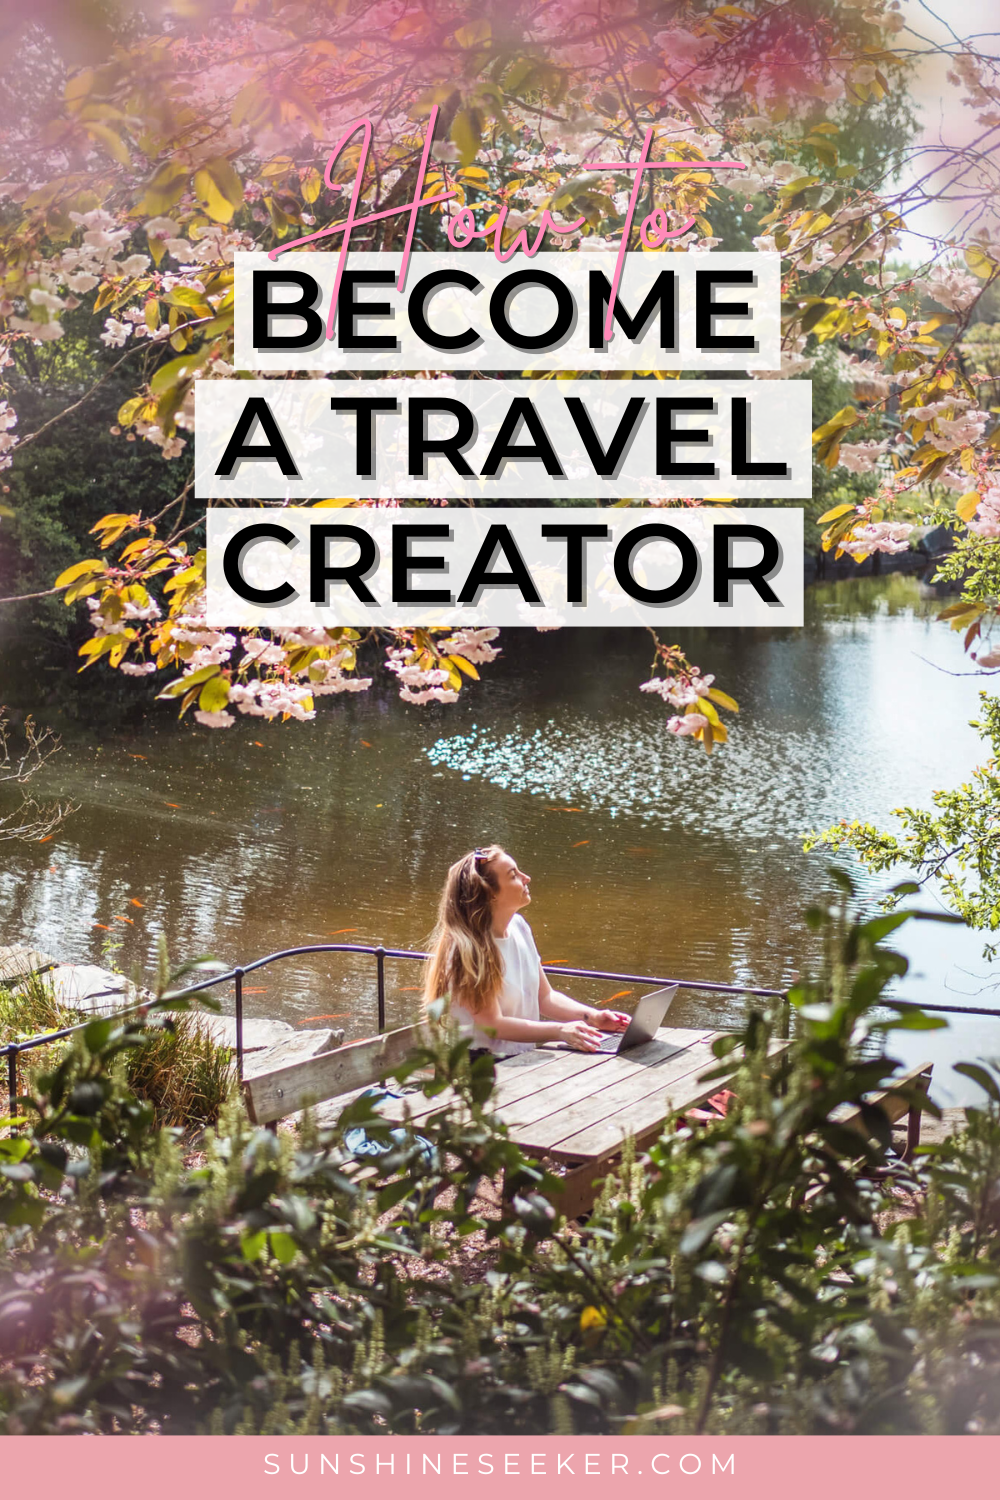 Are you an aspiring digital nomad? Want to make money online to create more freedom in your life to travel? Learn how to become a travel content creator in this step-by-step guide. 